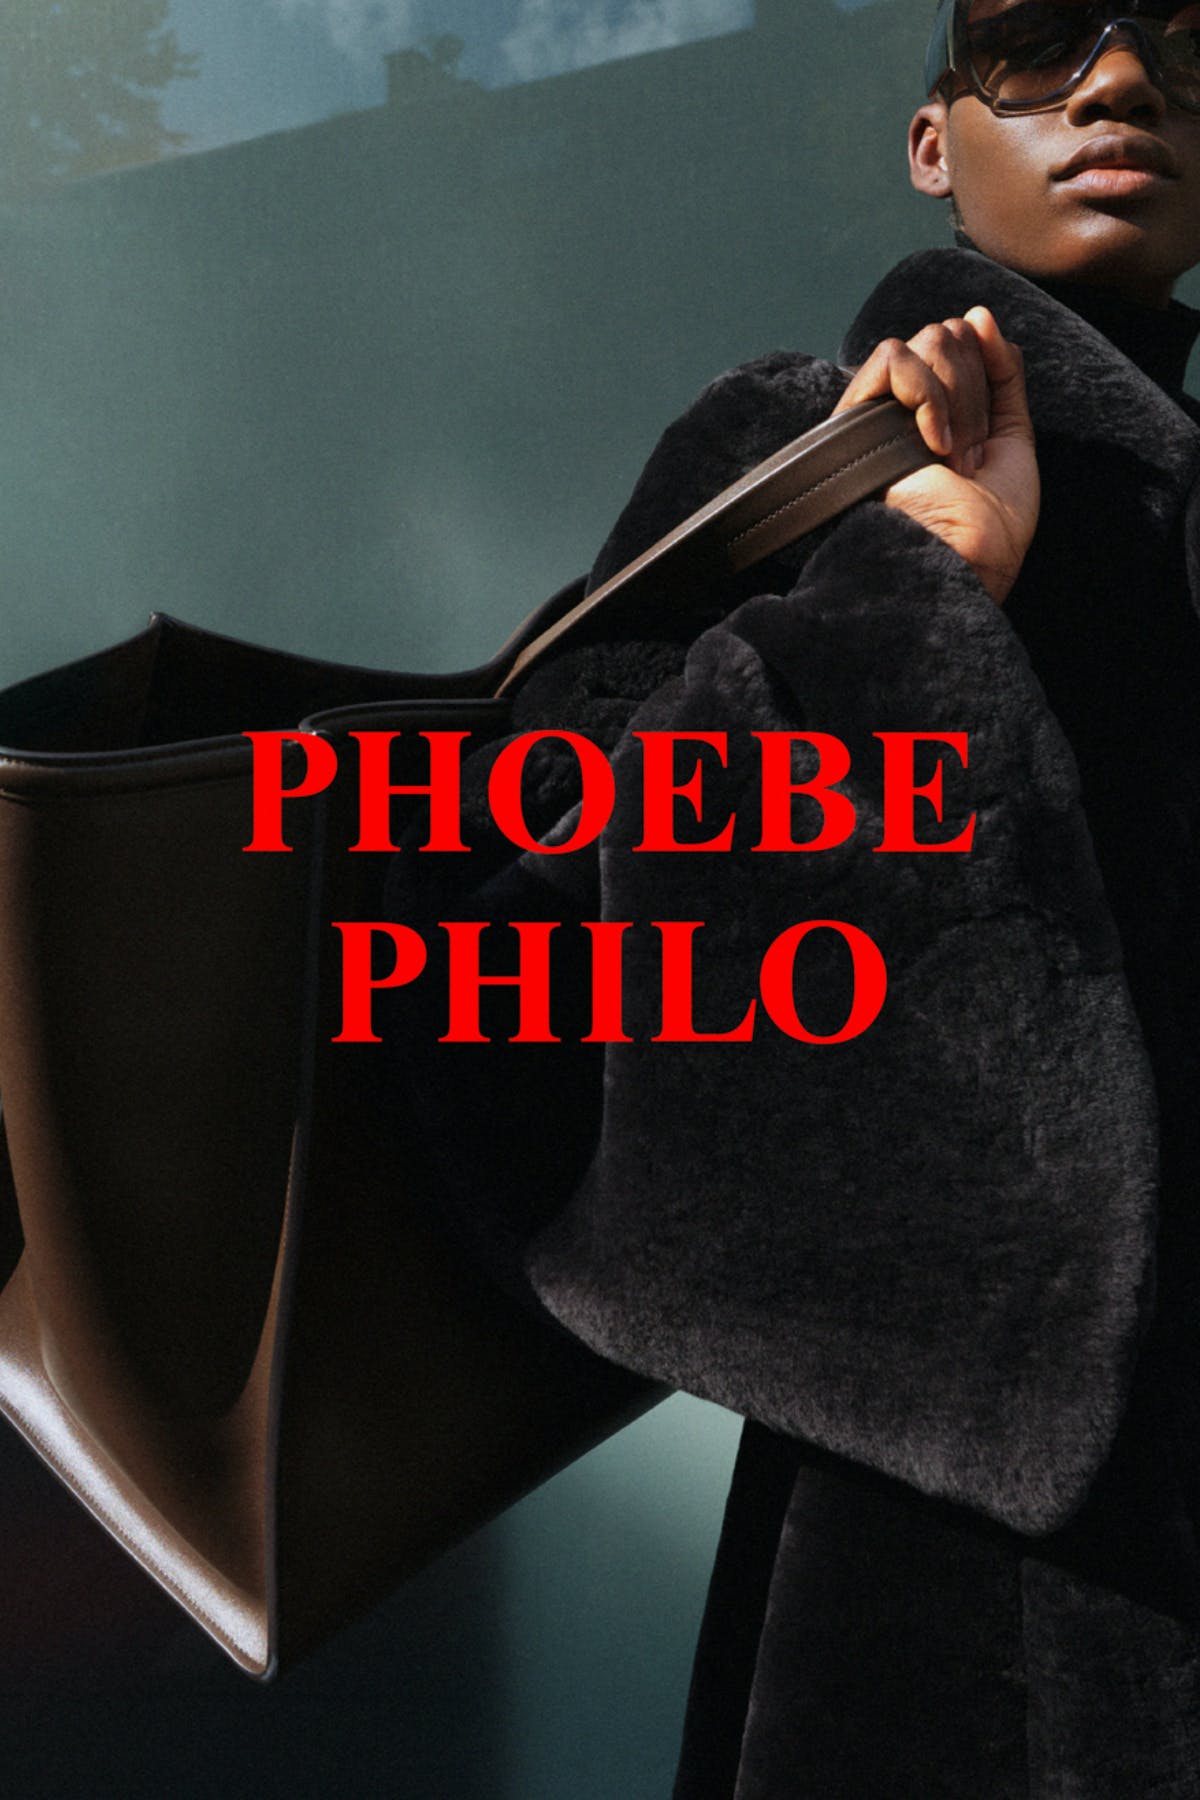 Phoebe Philo's First Drop, Explained